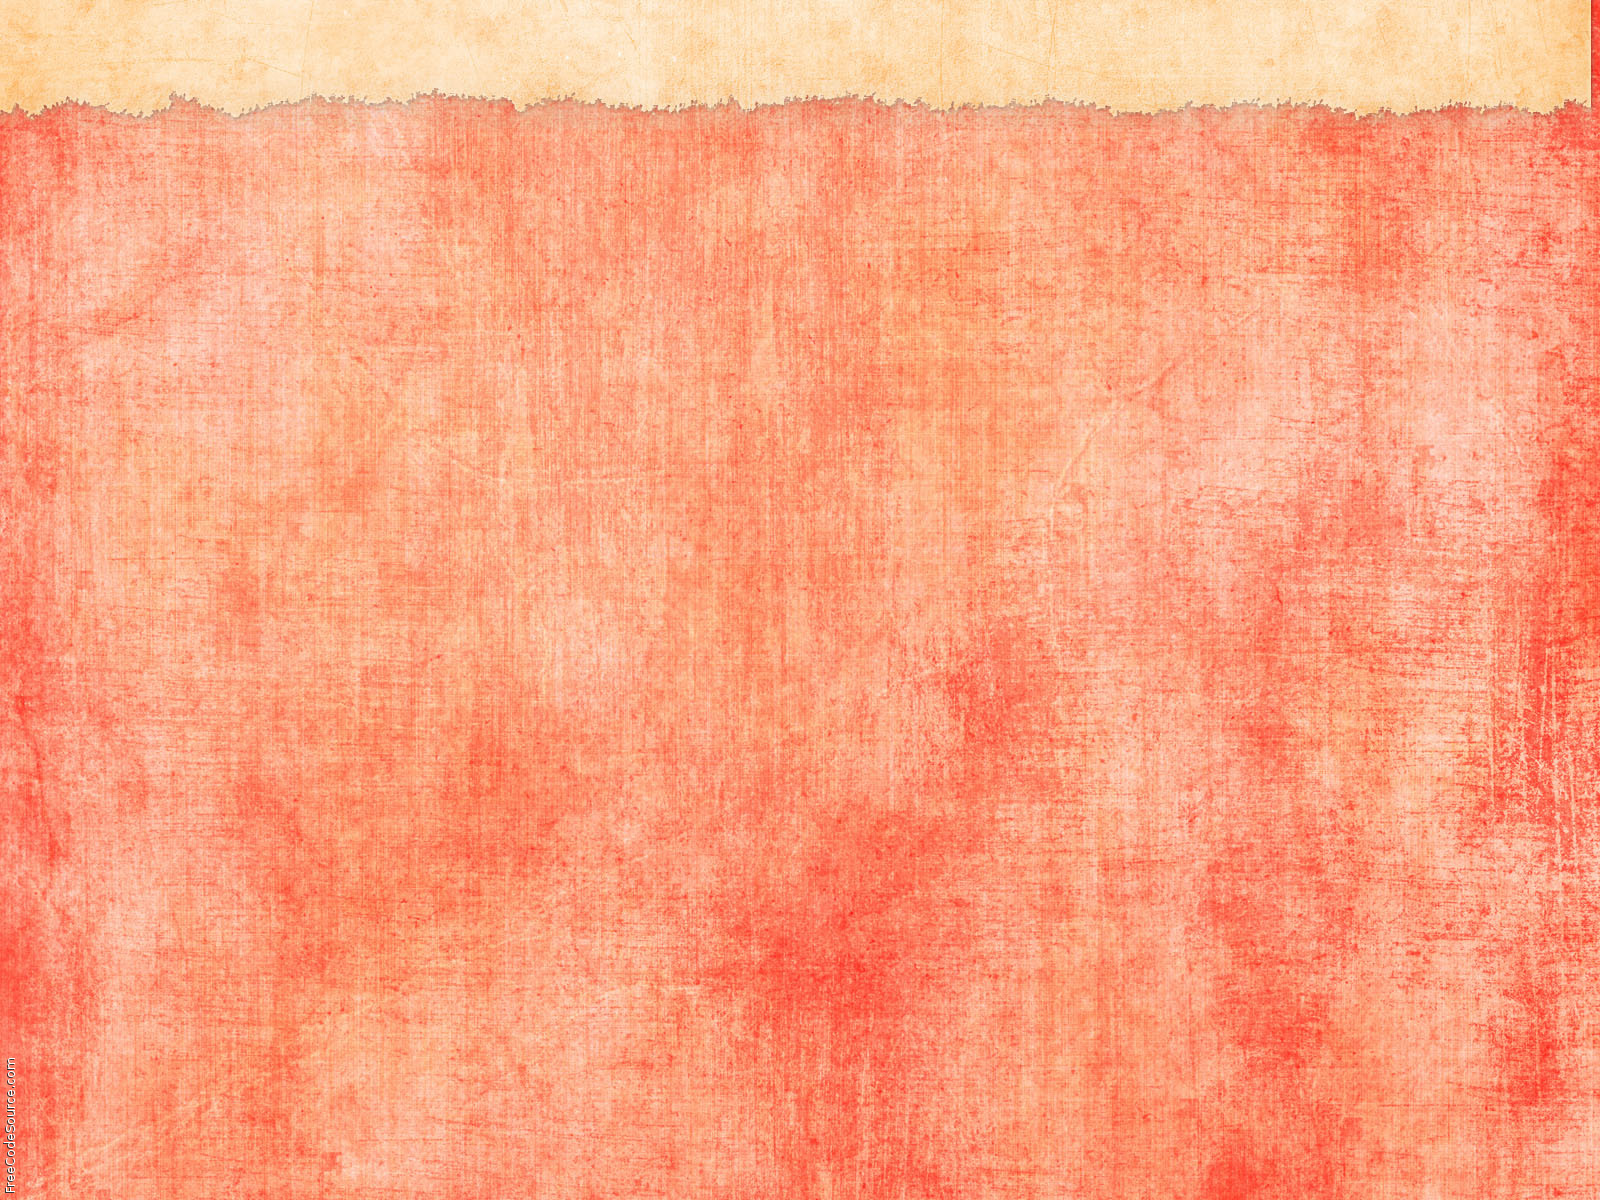 SunKissed Paper Backgrounds SunKissed Paper Layouts